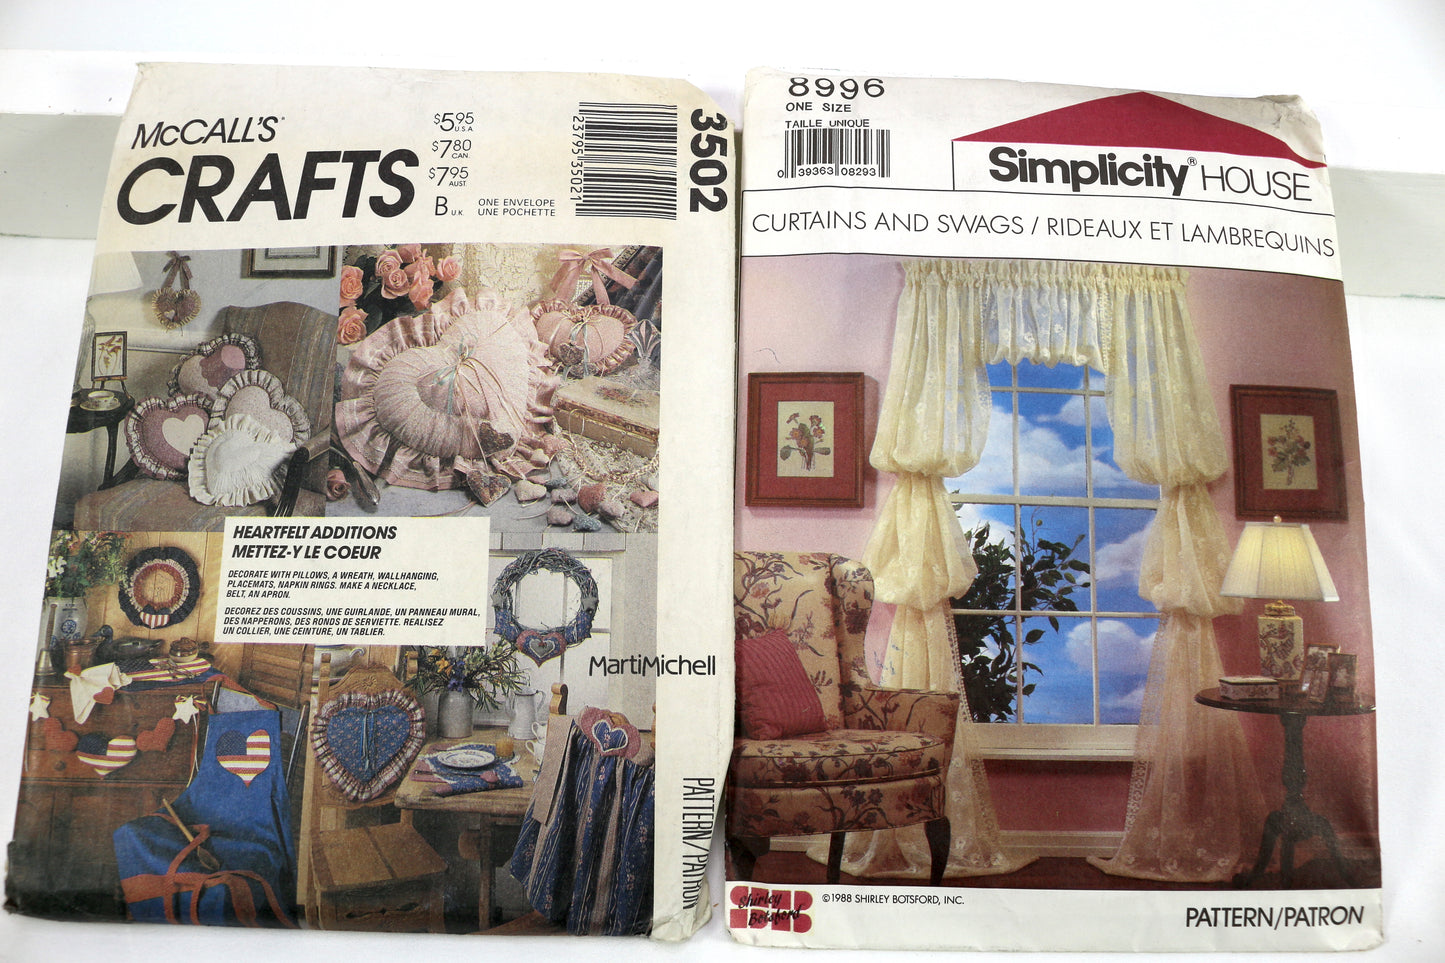 McCalls 3502 Heartfelt Additions Sewing Pattern or Simplicity 8996 Curtains & Swag Sewing Pattern